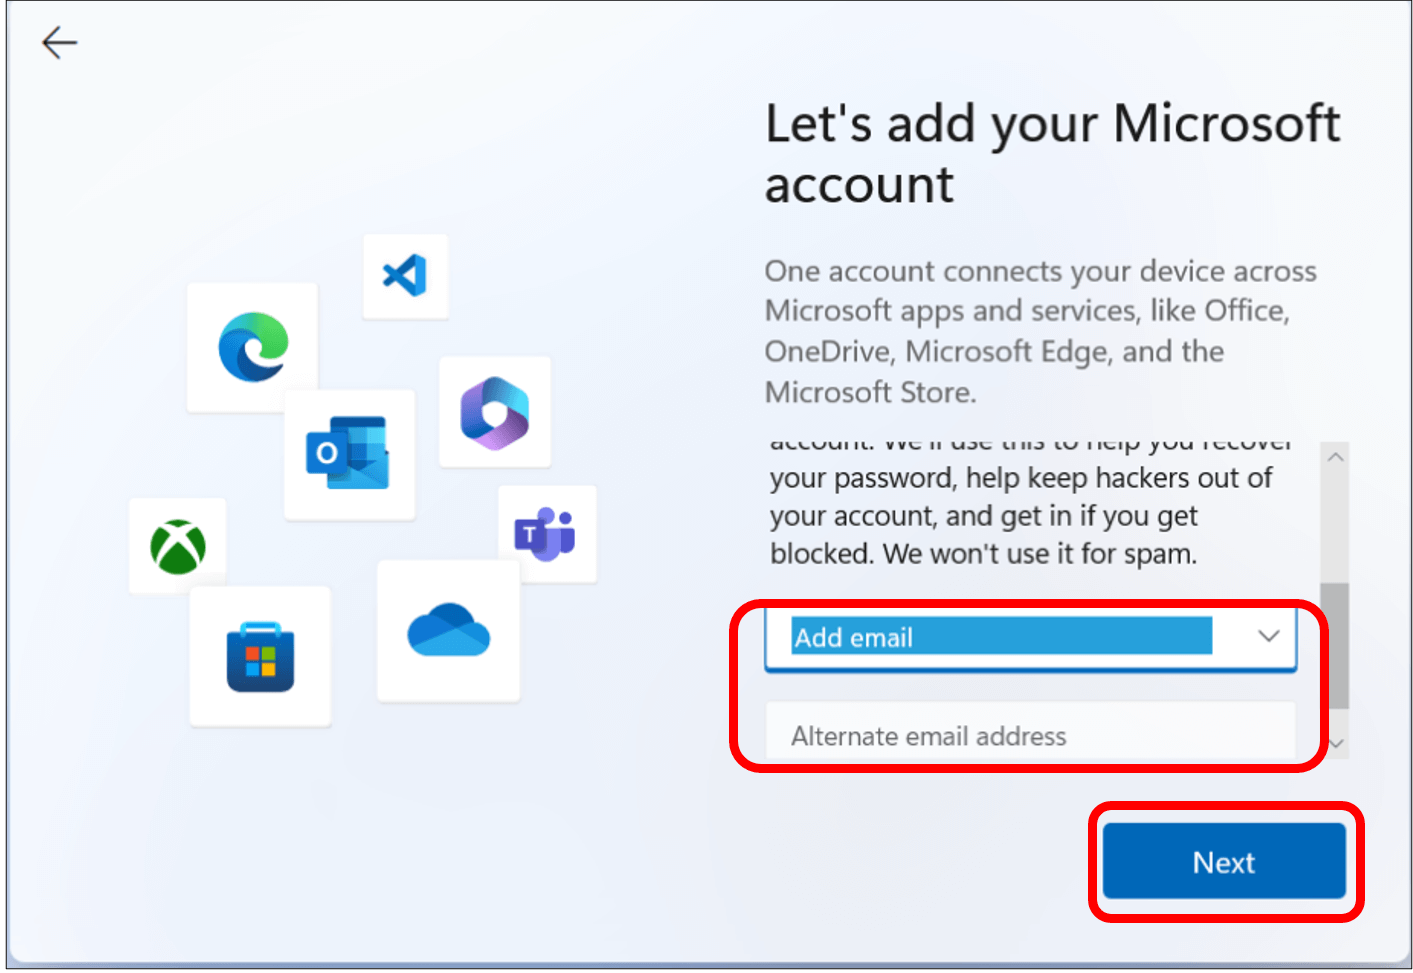 Screen to add secondary email to Microsoft account with Add email highlighted and then Next highlighted in bottom right corner.